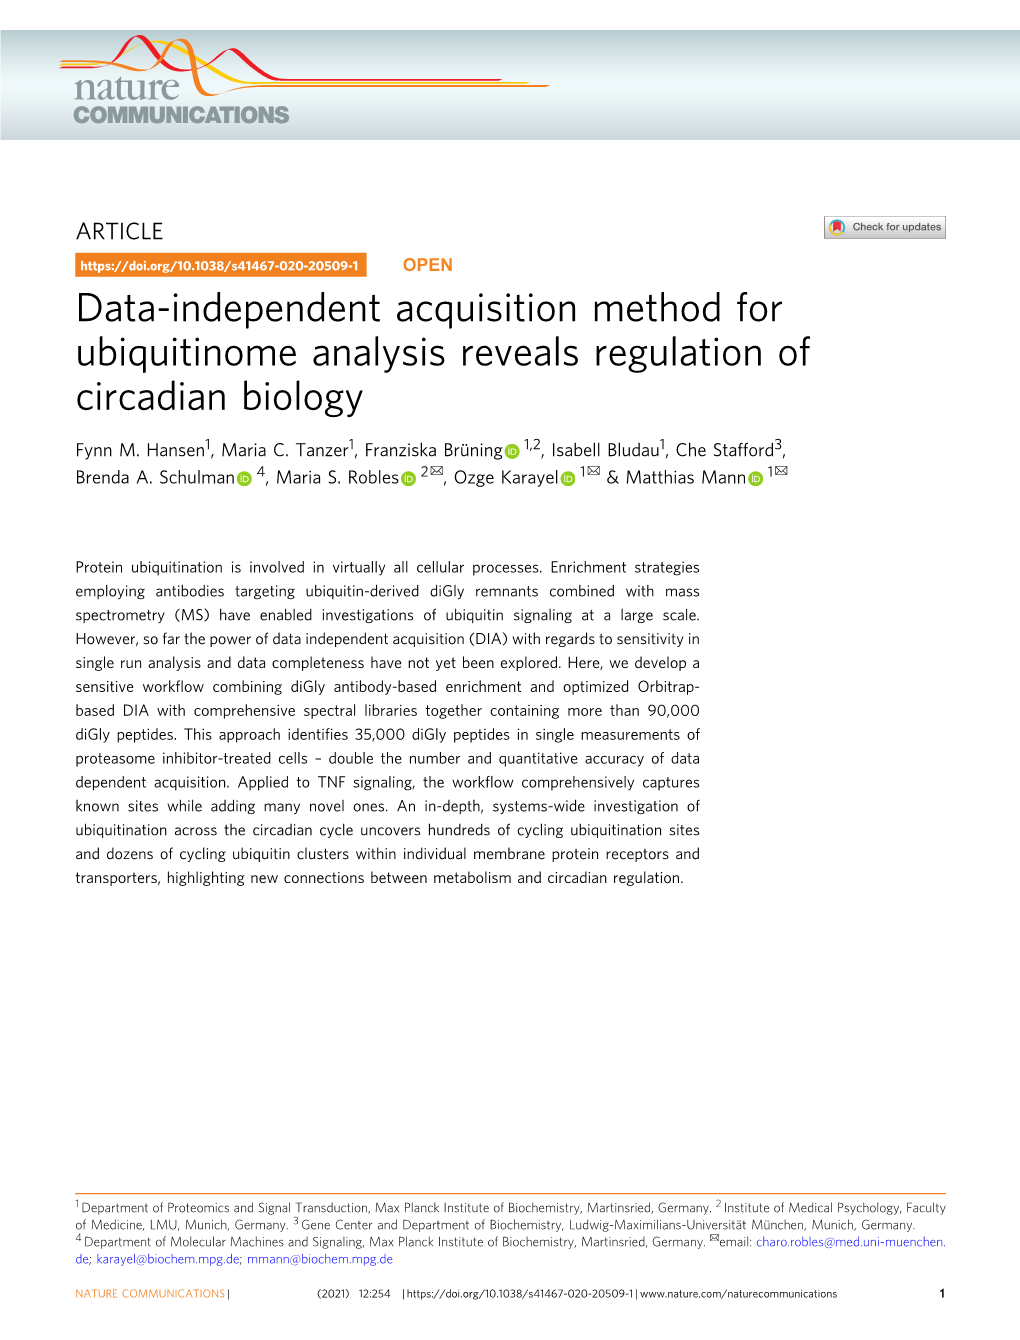 Data-Independent Acquisition Method for Ubiquitinome Analysis Reveals Regulation of Circadian Biology